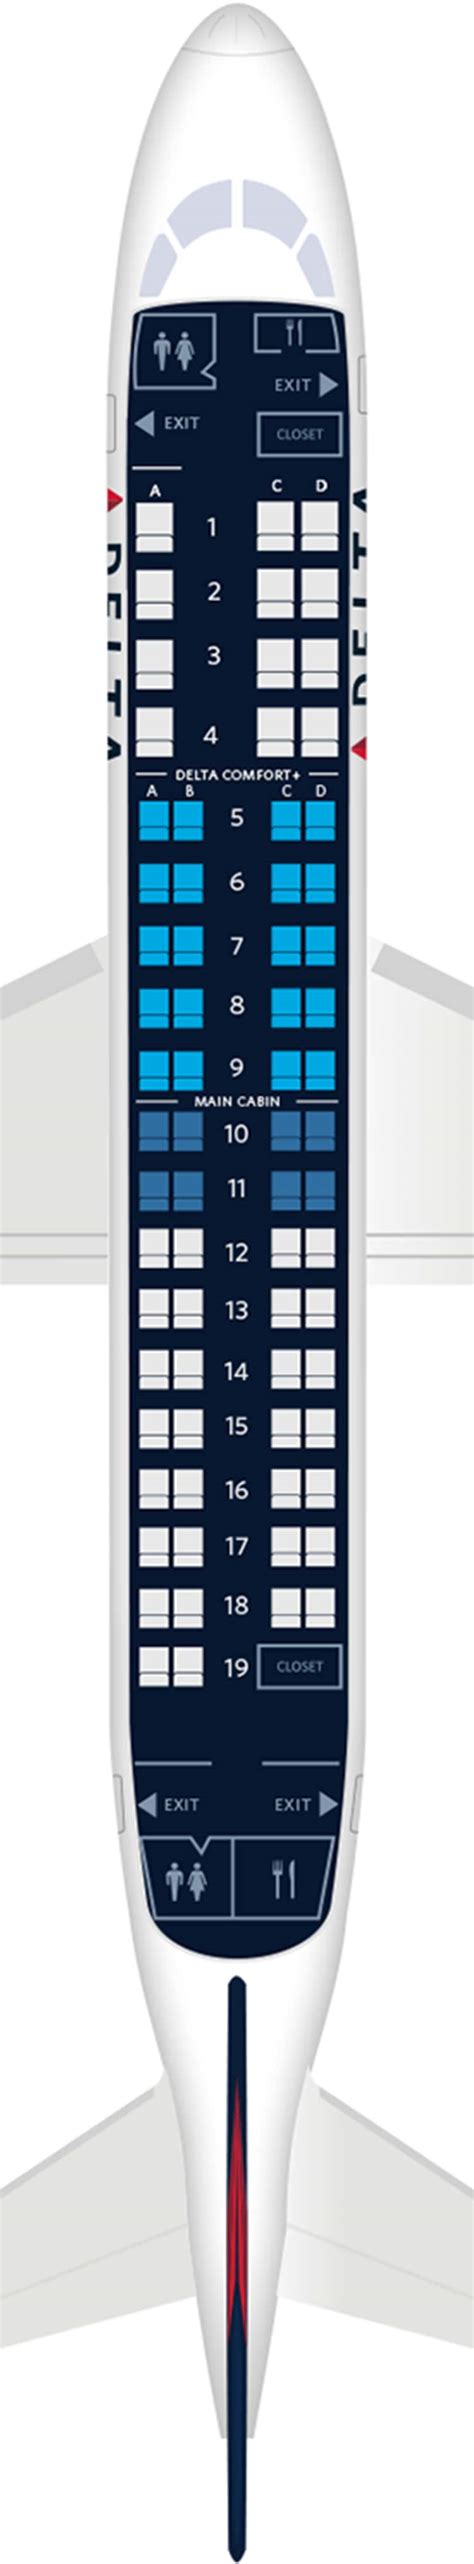 Embraer 175 seating chart. Royal Jordanian flies their version of Embraer ERJ-175 in a two class configuration with 12 Business Class recliner seats and 60 standard Economy Class seats. For your next Royal Jordanian flight, use this seating chart to get the most … 